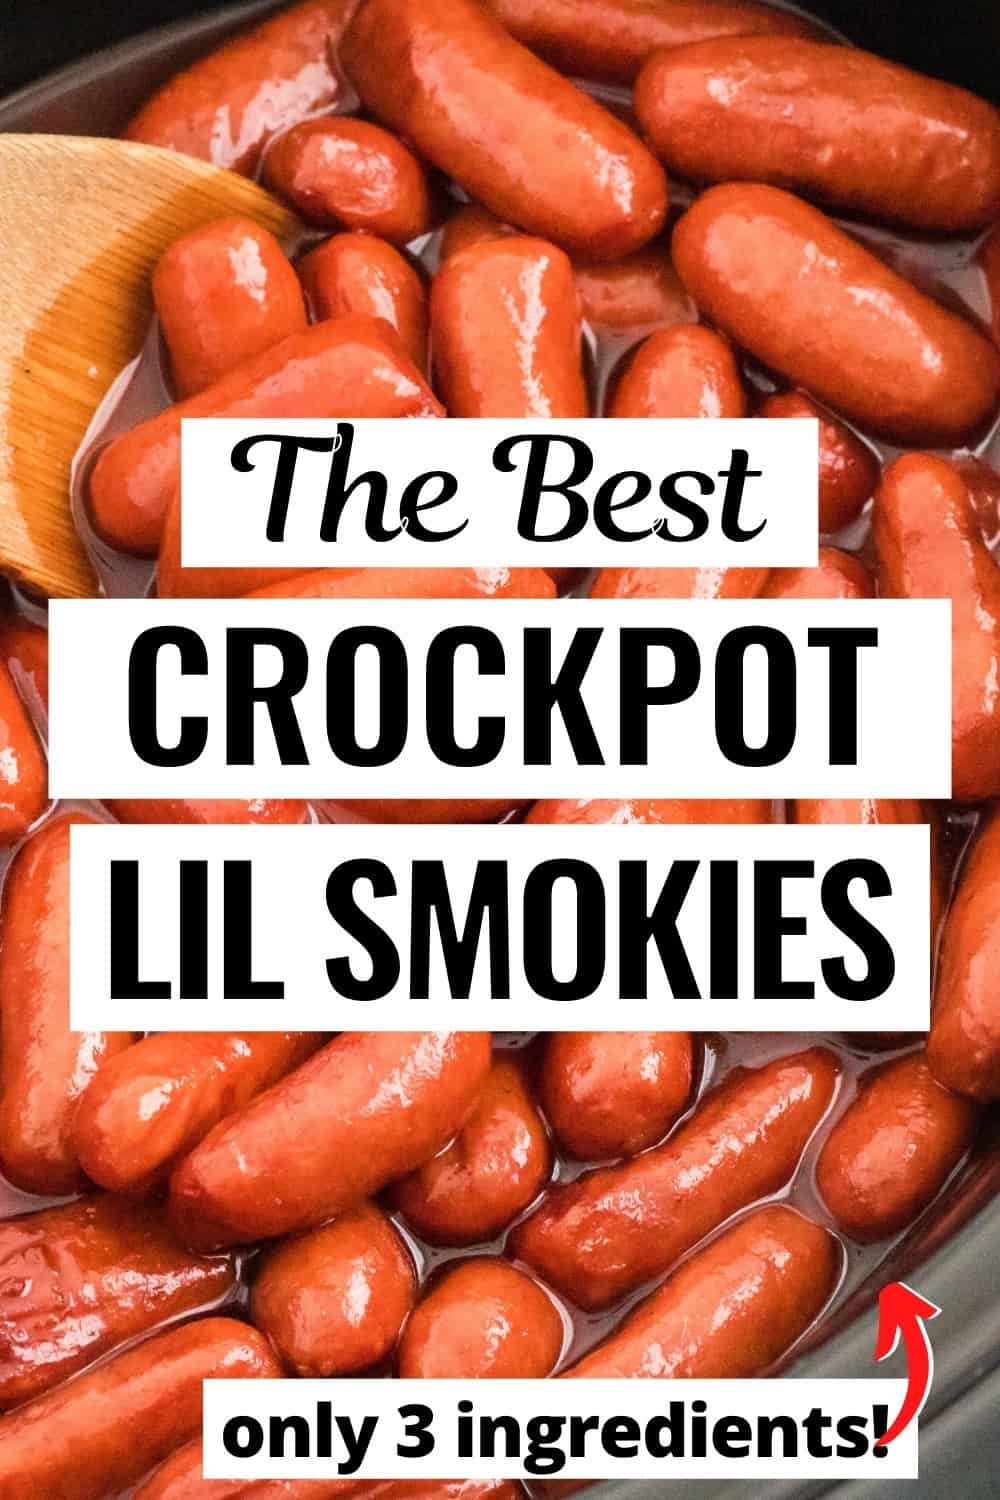 The Best Crockpot Lil Smokies - only 3 ingredients.